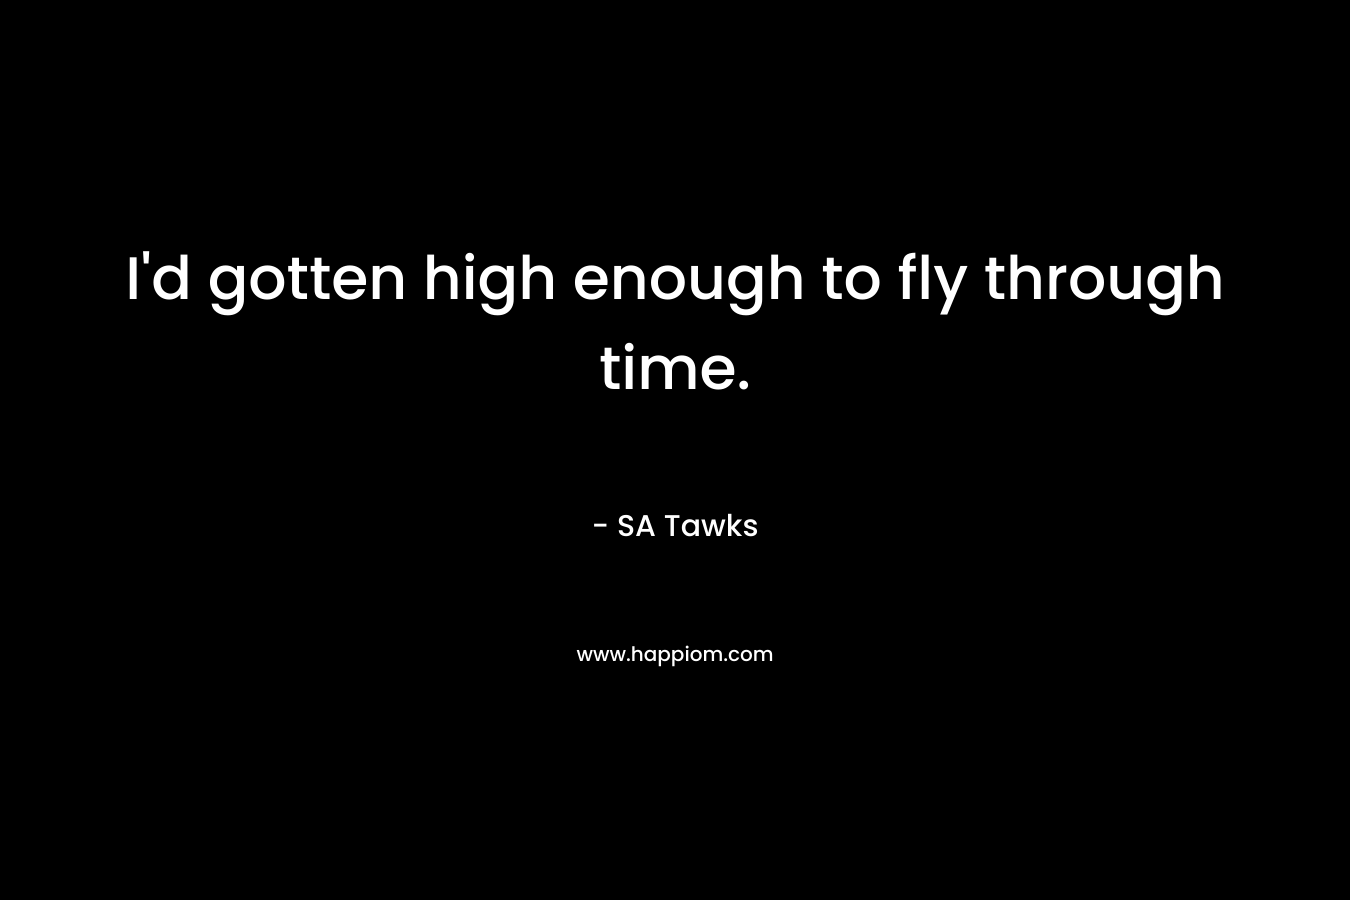 I'd gotten high enough to fly through time.